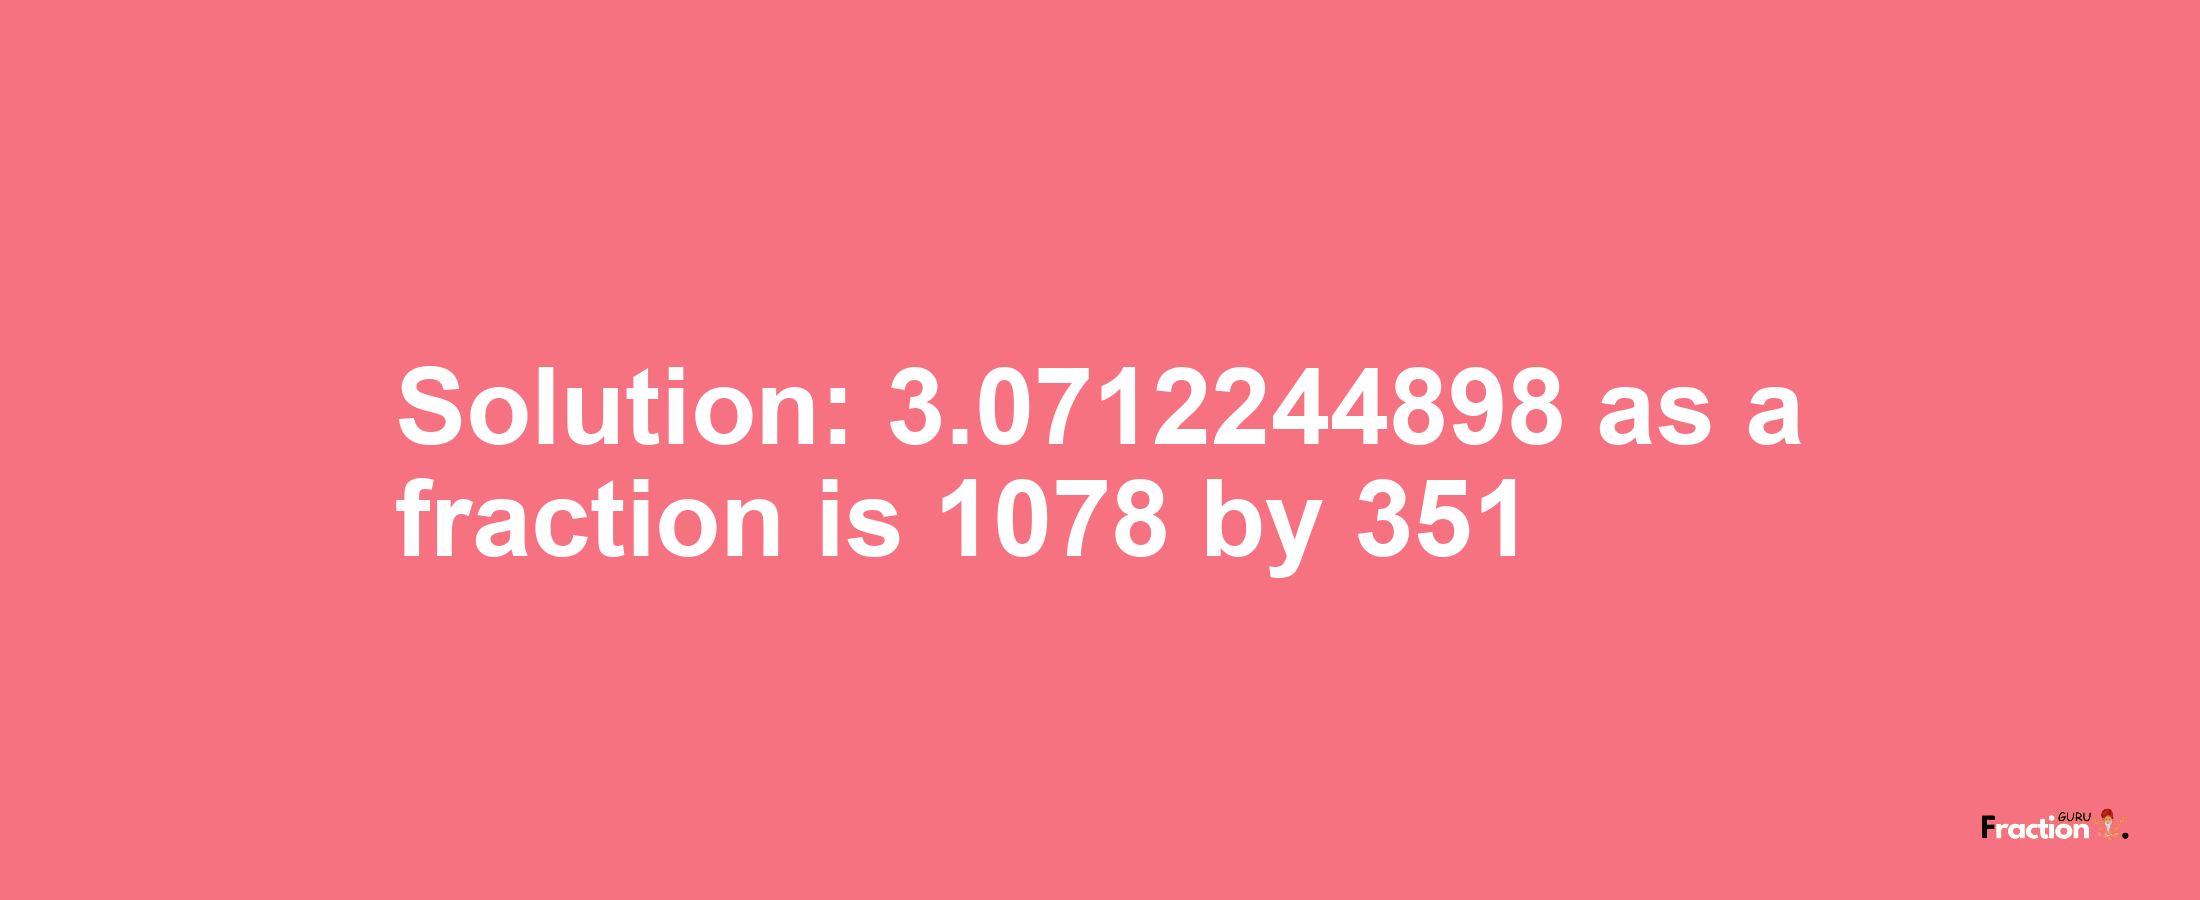 Solution:3.0712244898 as a fraction is 1078/351